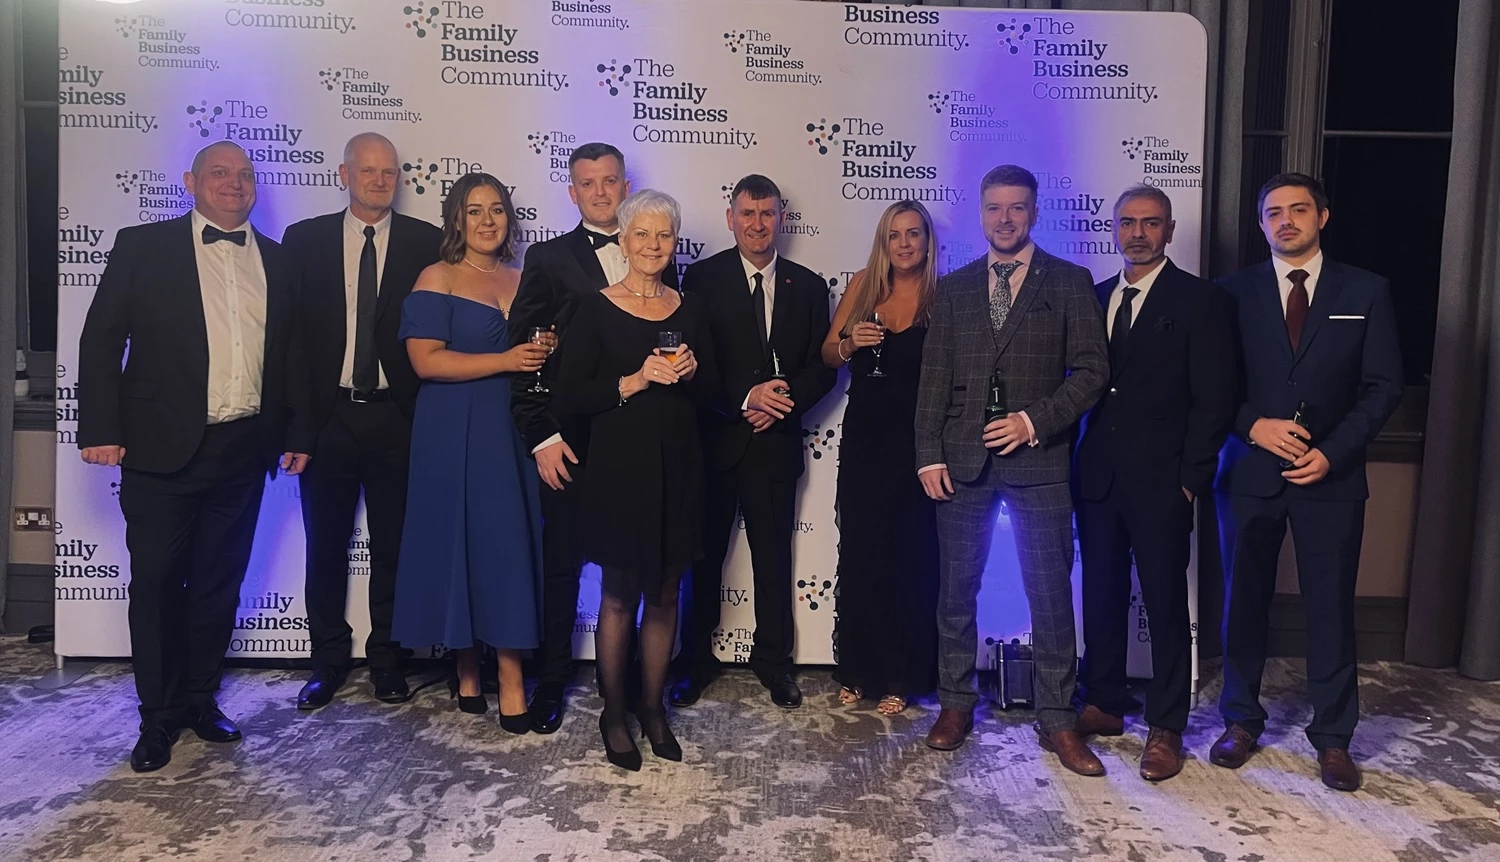 Dominion Print staff at The Yorkshire and Humberside Family Business Awards